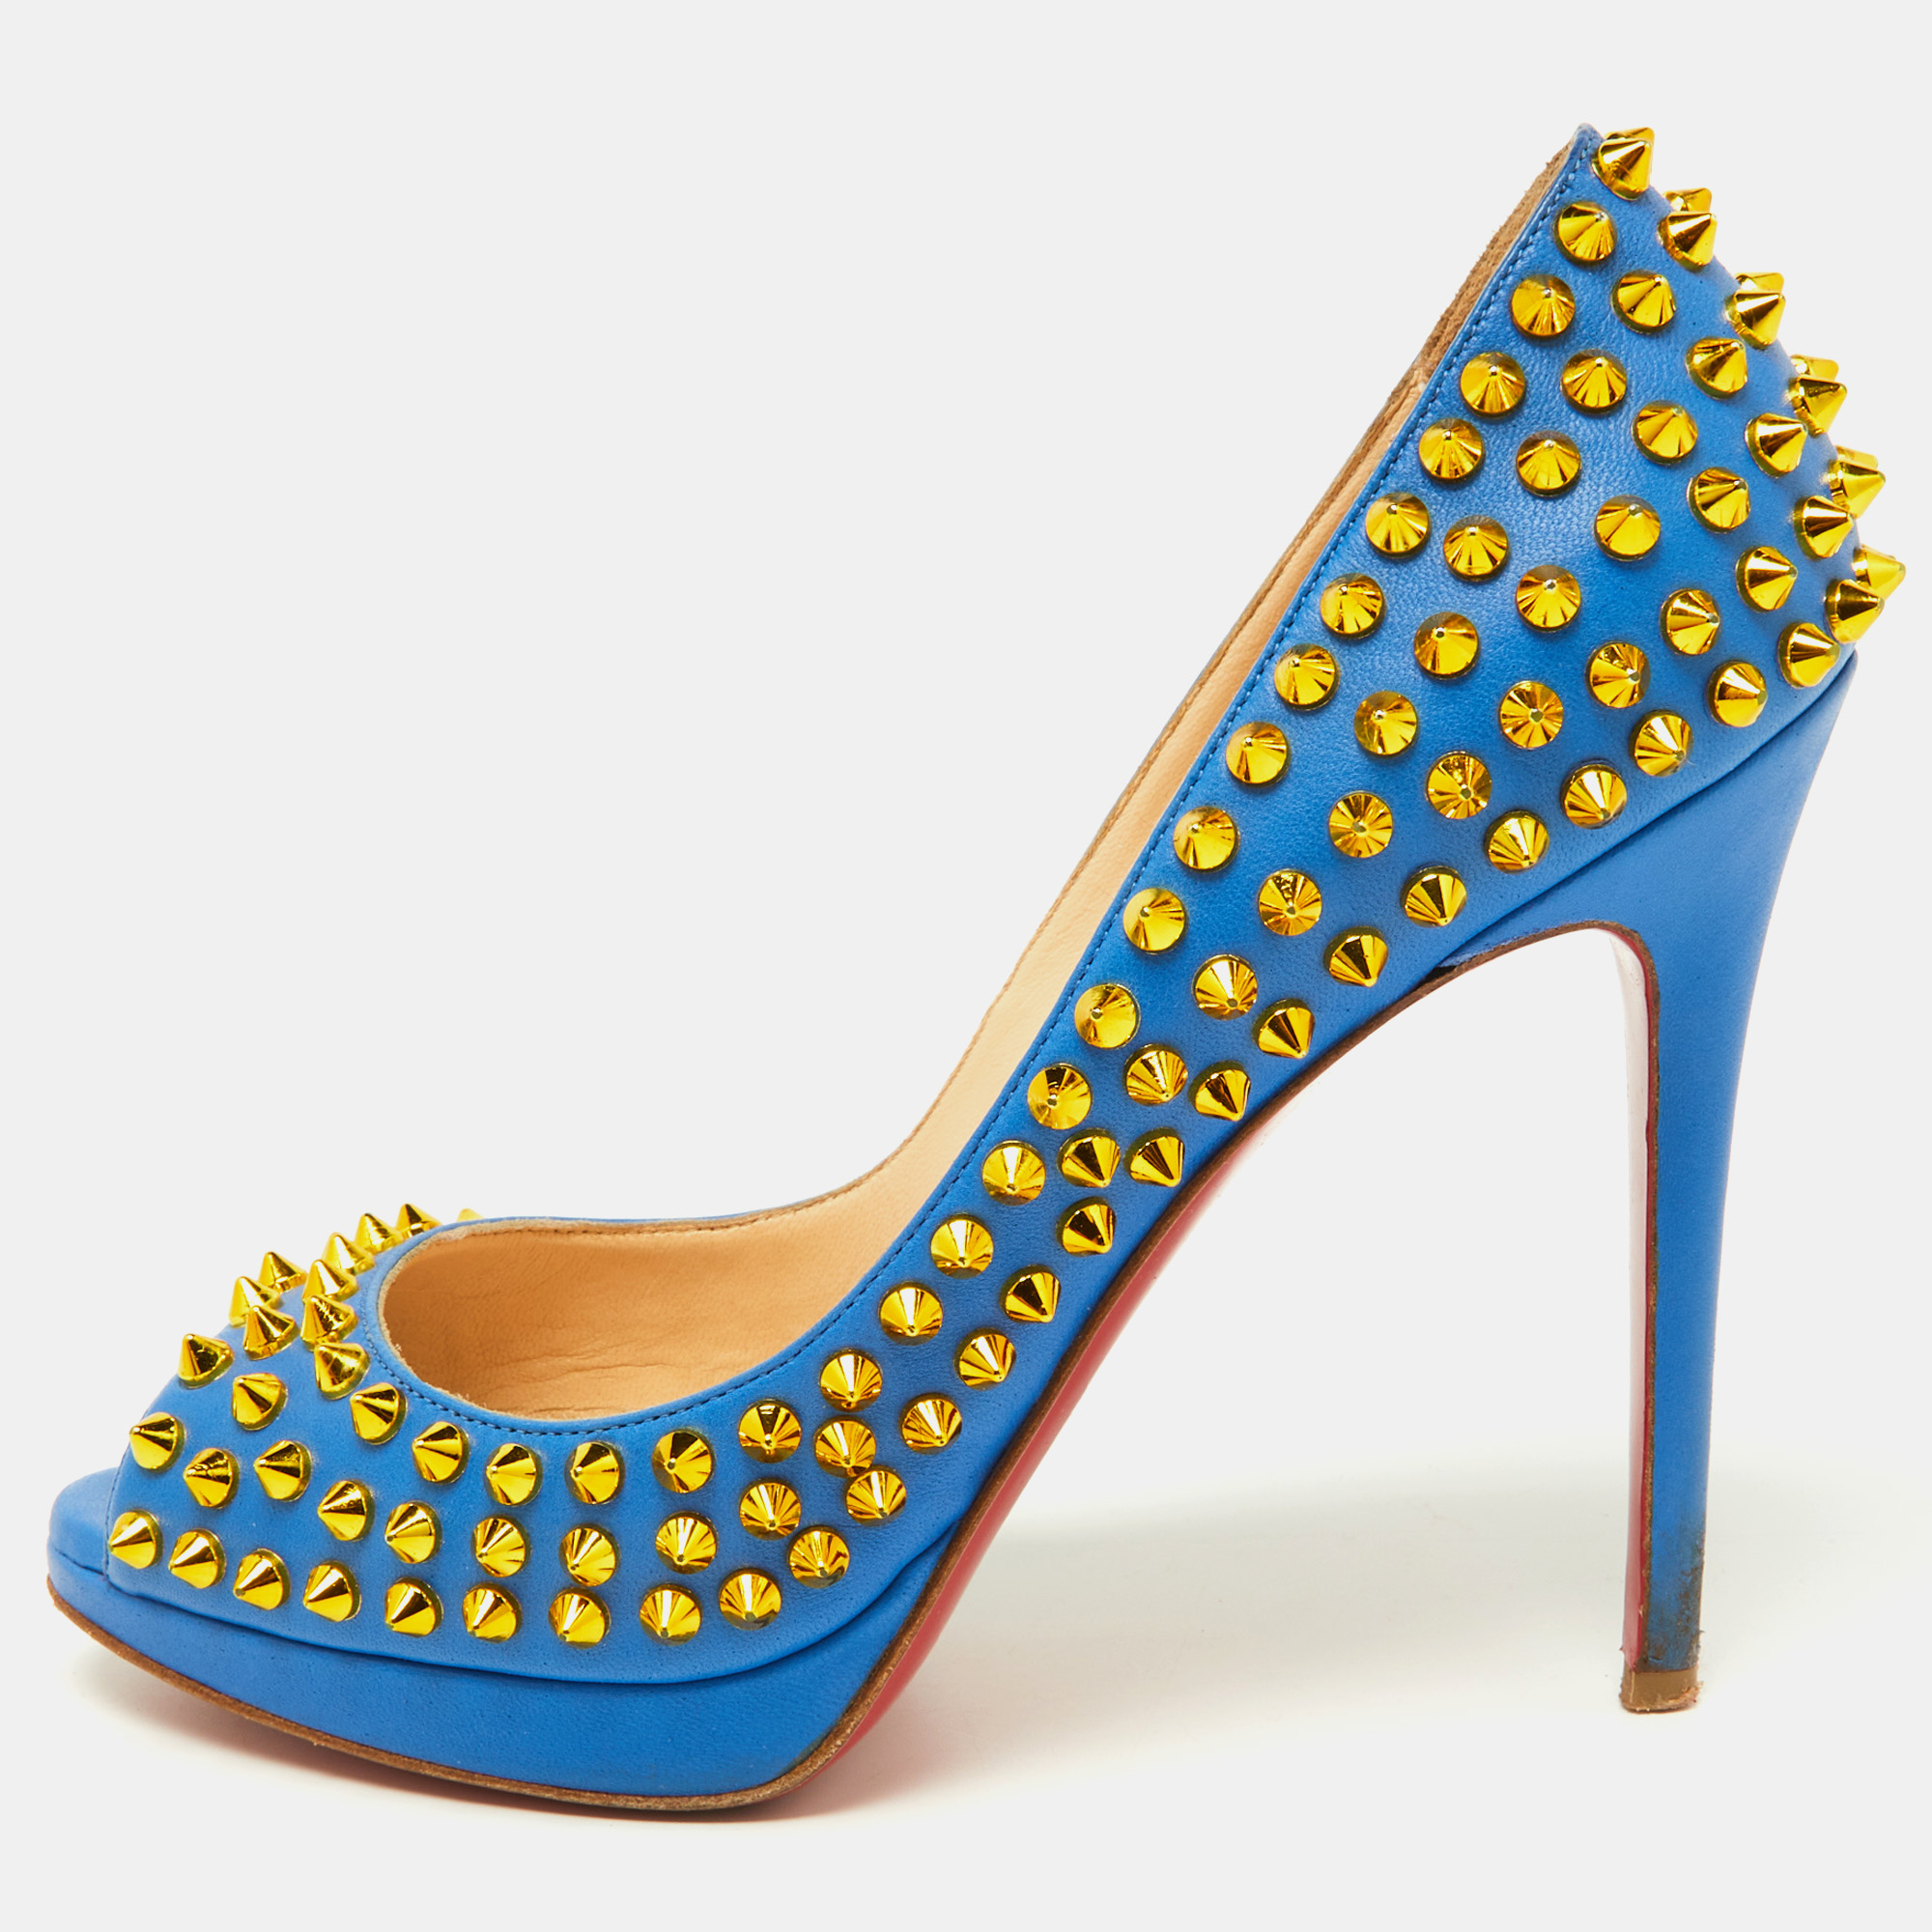 Pre-owned Christian Louboutin Blue Leather Yolanda Spikes Pumps Size 37.5